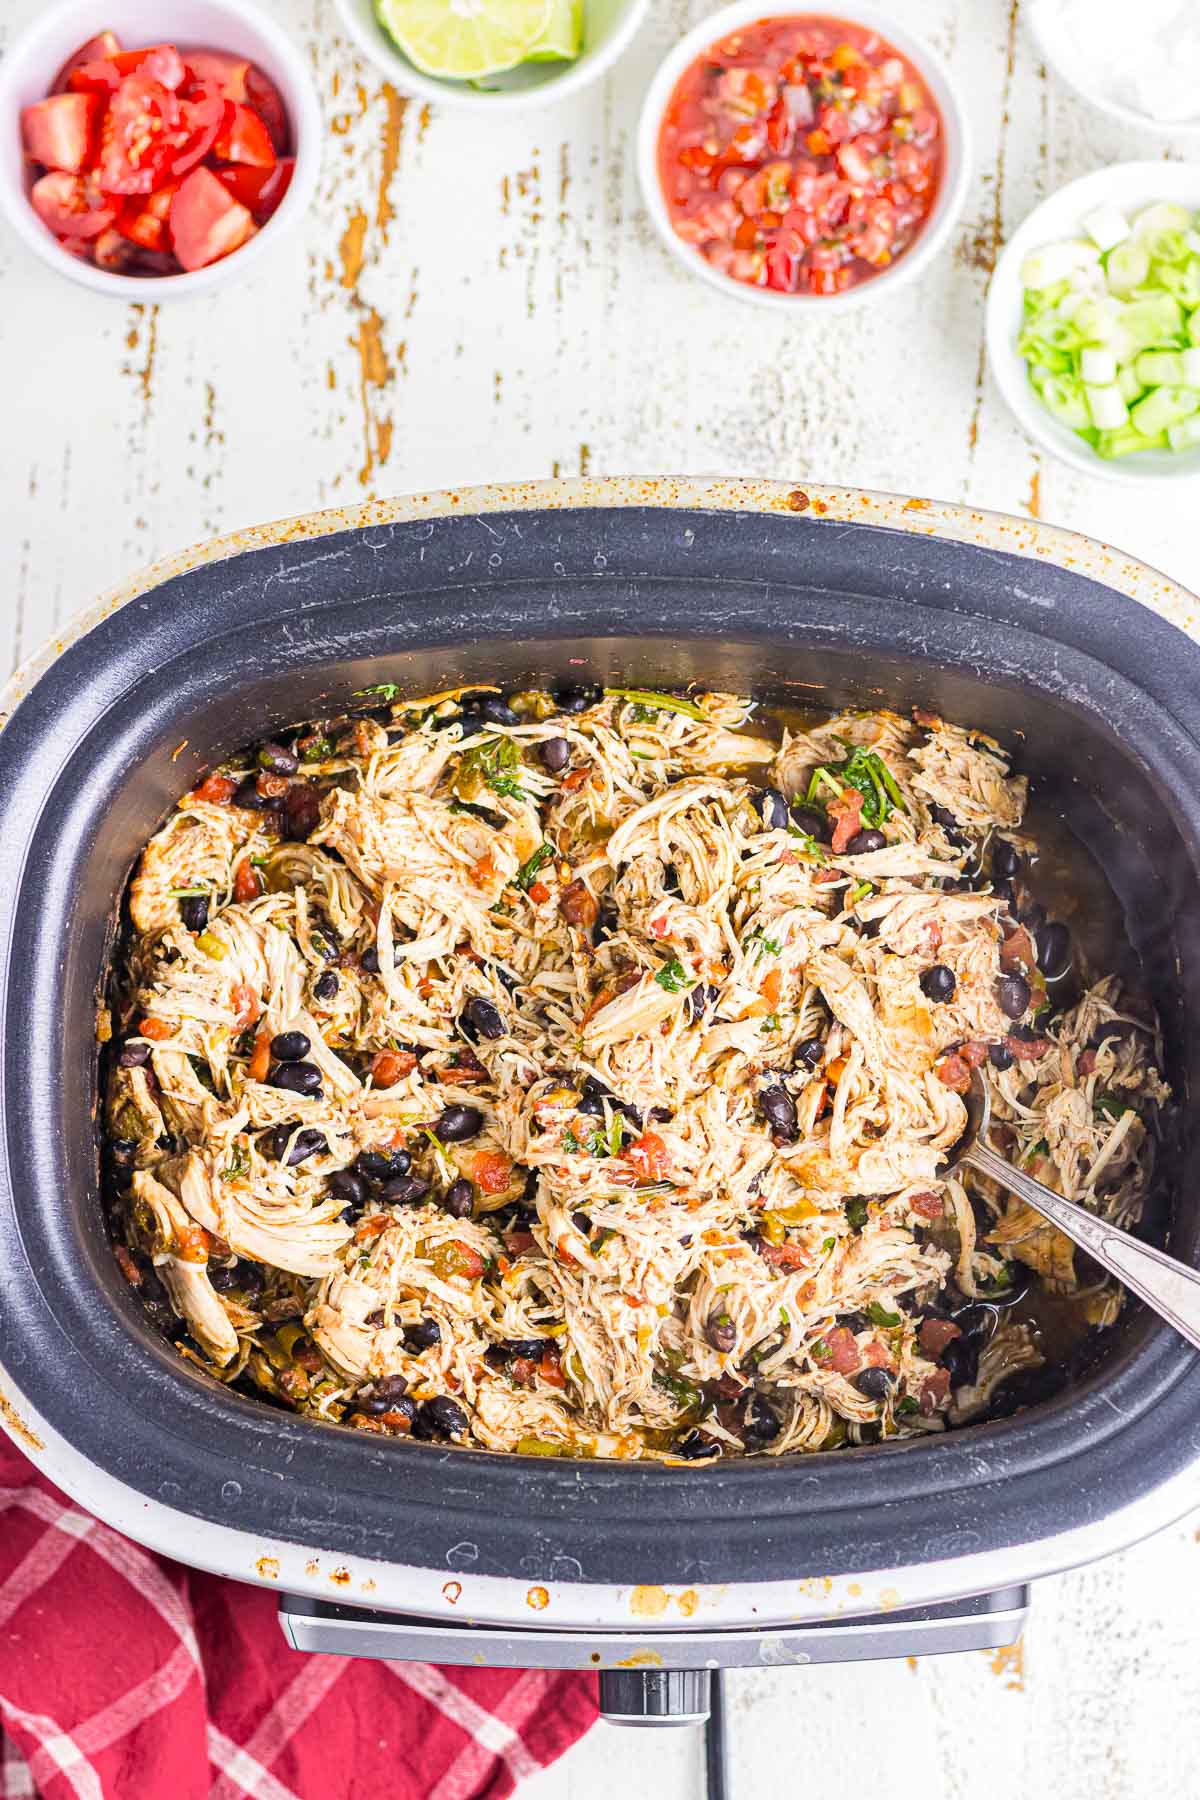 A crockpot filled with cooked and shredded chicken, black beans, and tomatoes.